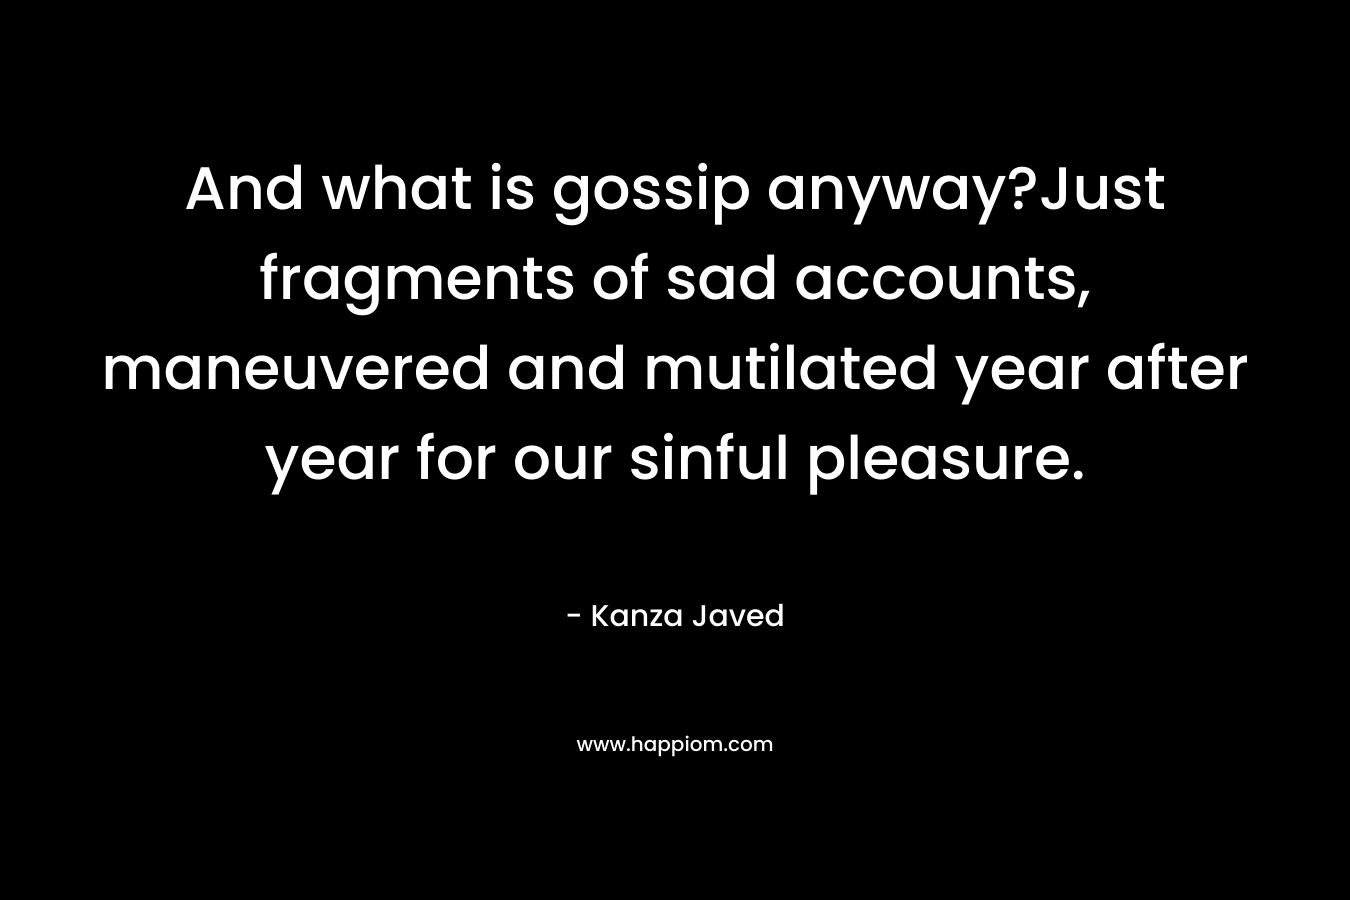 And what is gossip anyway?Just fragments of sad accounts, maneuvered and mutilated year after year for our sinful pleasure. – Kanza Javed